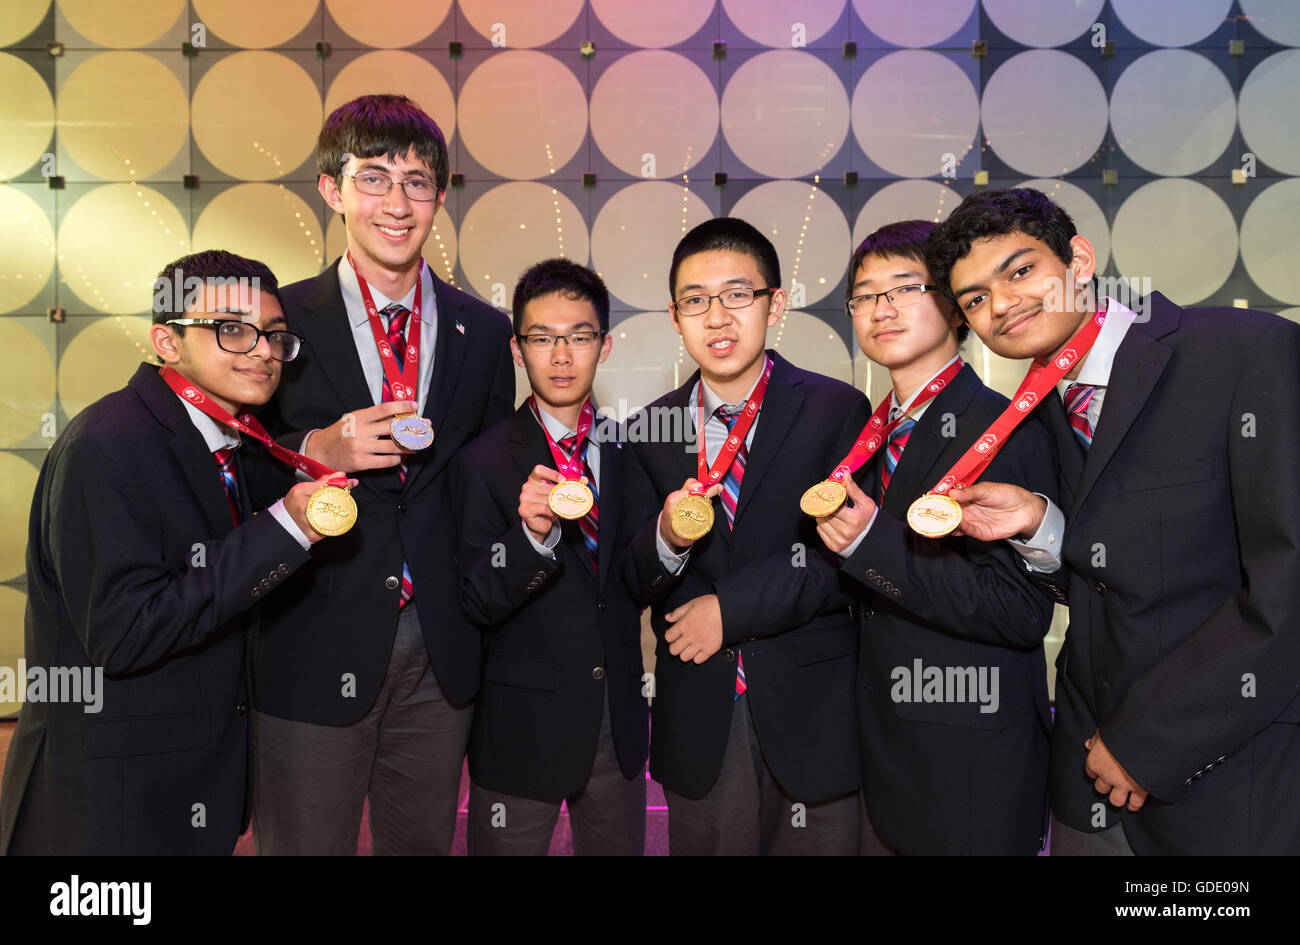 Hong Kong, China. 15th July, 2016. The 6 members of the USA team win the 57th International Mathematics Olympiad each taking away a gold medal, 2 with perfect scores under team leader Po-Shen Loh.L to R Ankan Bhattacharya from Detroit, Michael Kural from Riverside Connecticut, Allen Liu (perfect score)from Rochester, Yuan Yao (perfect score) from Exeter Hampshire, Junyao Peng from Princeton and Ashwin Sah from Portland Credit:  Jayne Russell/ZUMA Wire/Alamy Live News Stock Photo